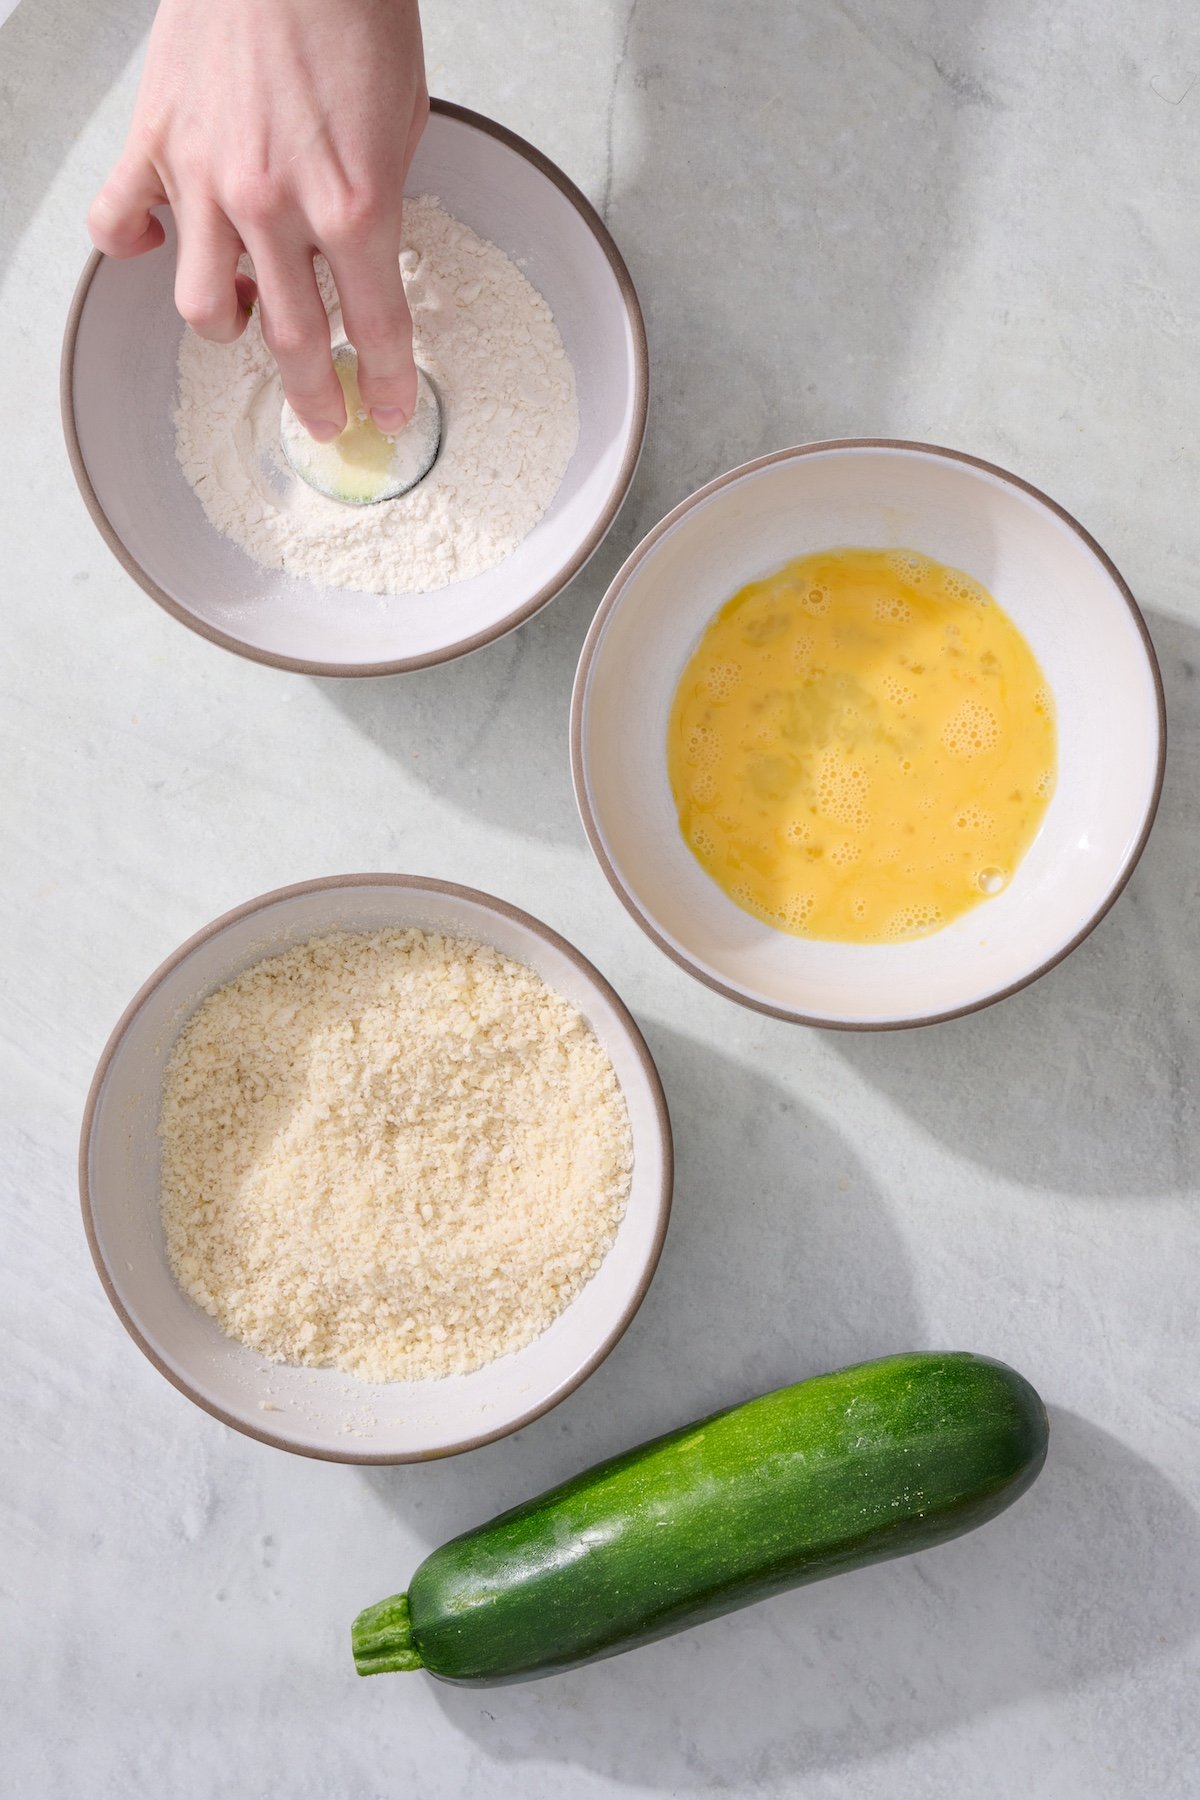 Three bowls. One with flour, another with beaten egg and the third with panko breading. A hand is dipping a zucchini coin in the flour bowl.